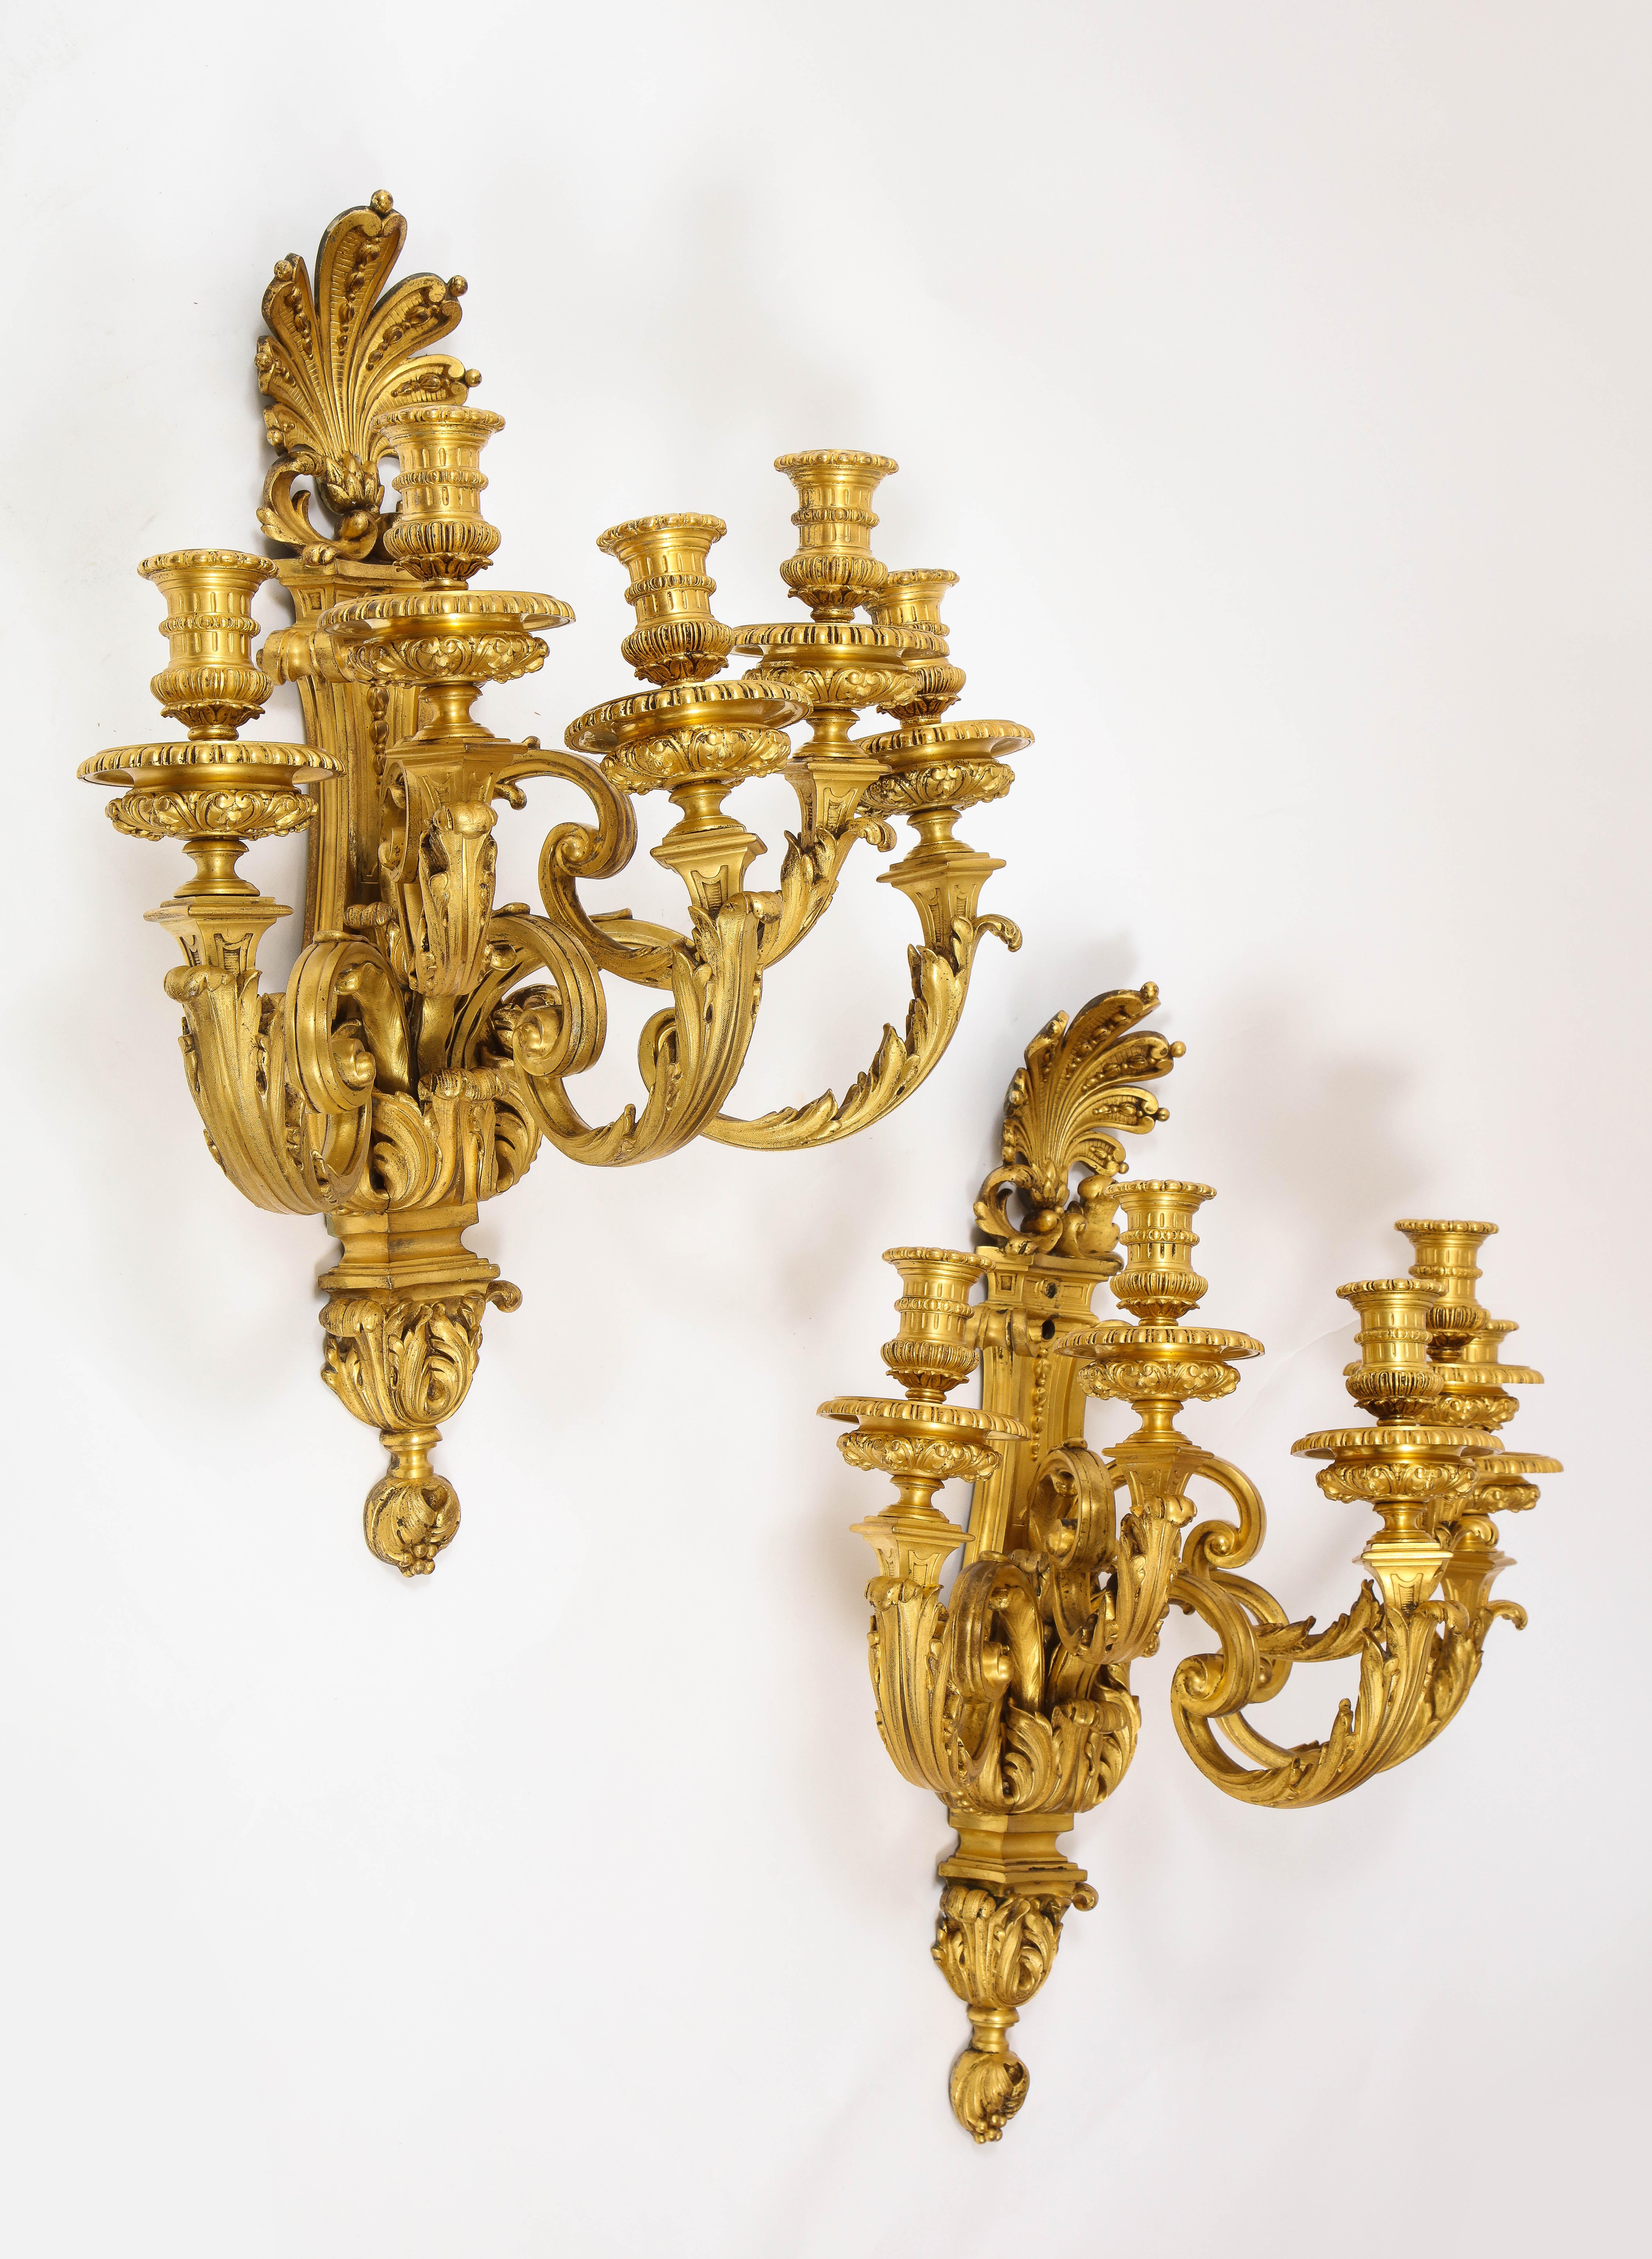 An incredible and monumental pair of 19th century French Louis XVI style five-arm fore bronze sconces. Each sconce is of a monumental size. Most sconces of this era are between two and four arm, however, these are an impressive five arms. Each is